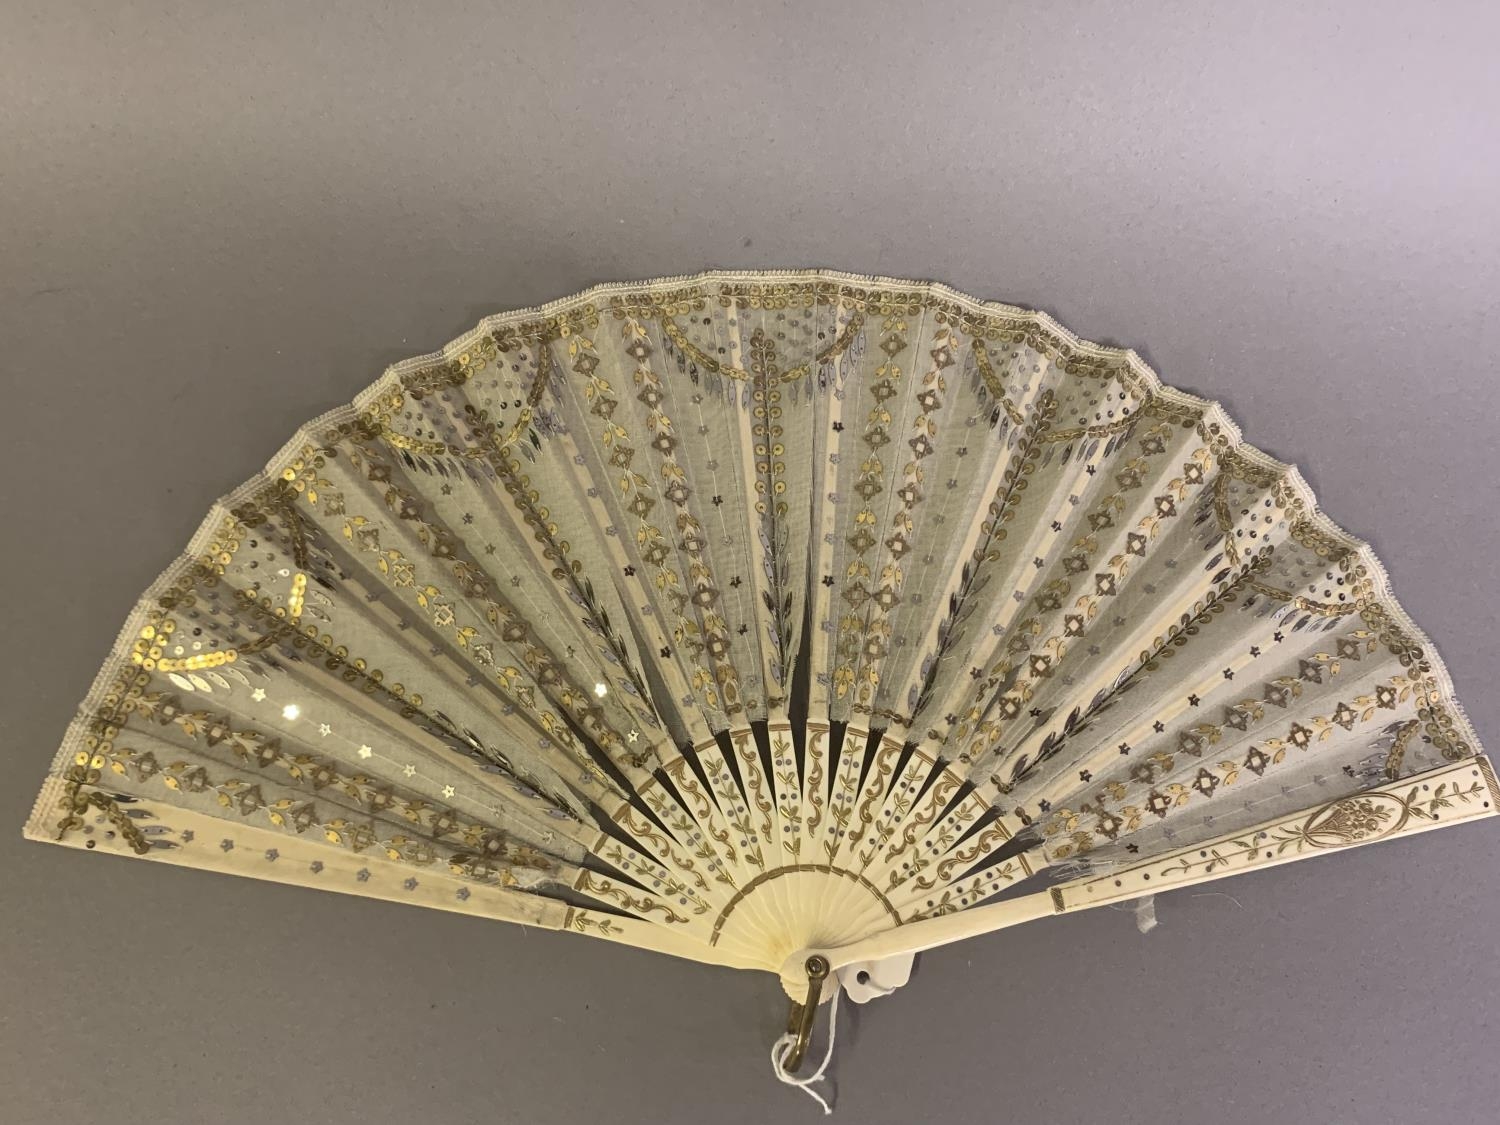 Three 20th century fans: the first, in white mother of pearl, a pastiche of an 18th century fan, the - Image 4 of 9